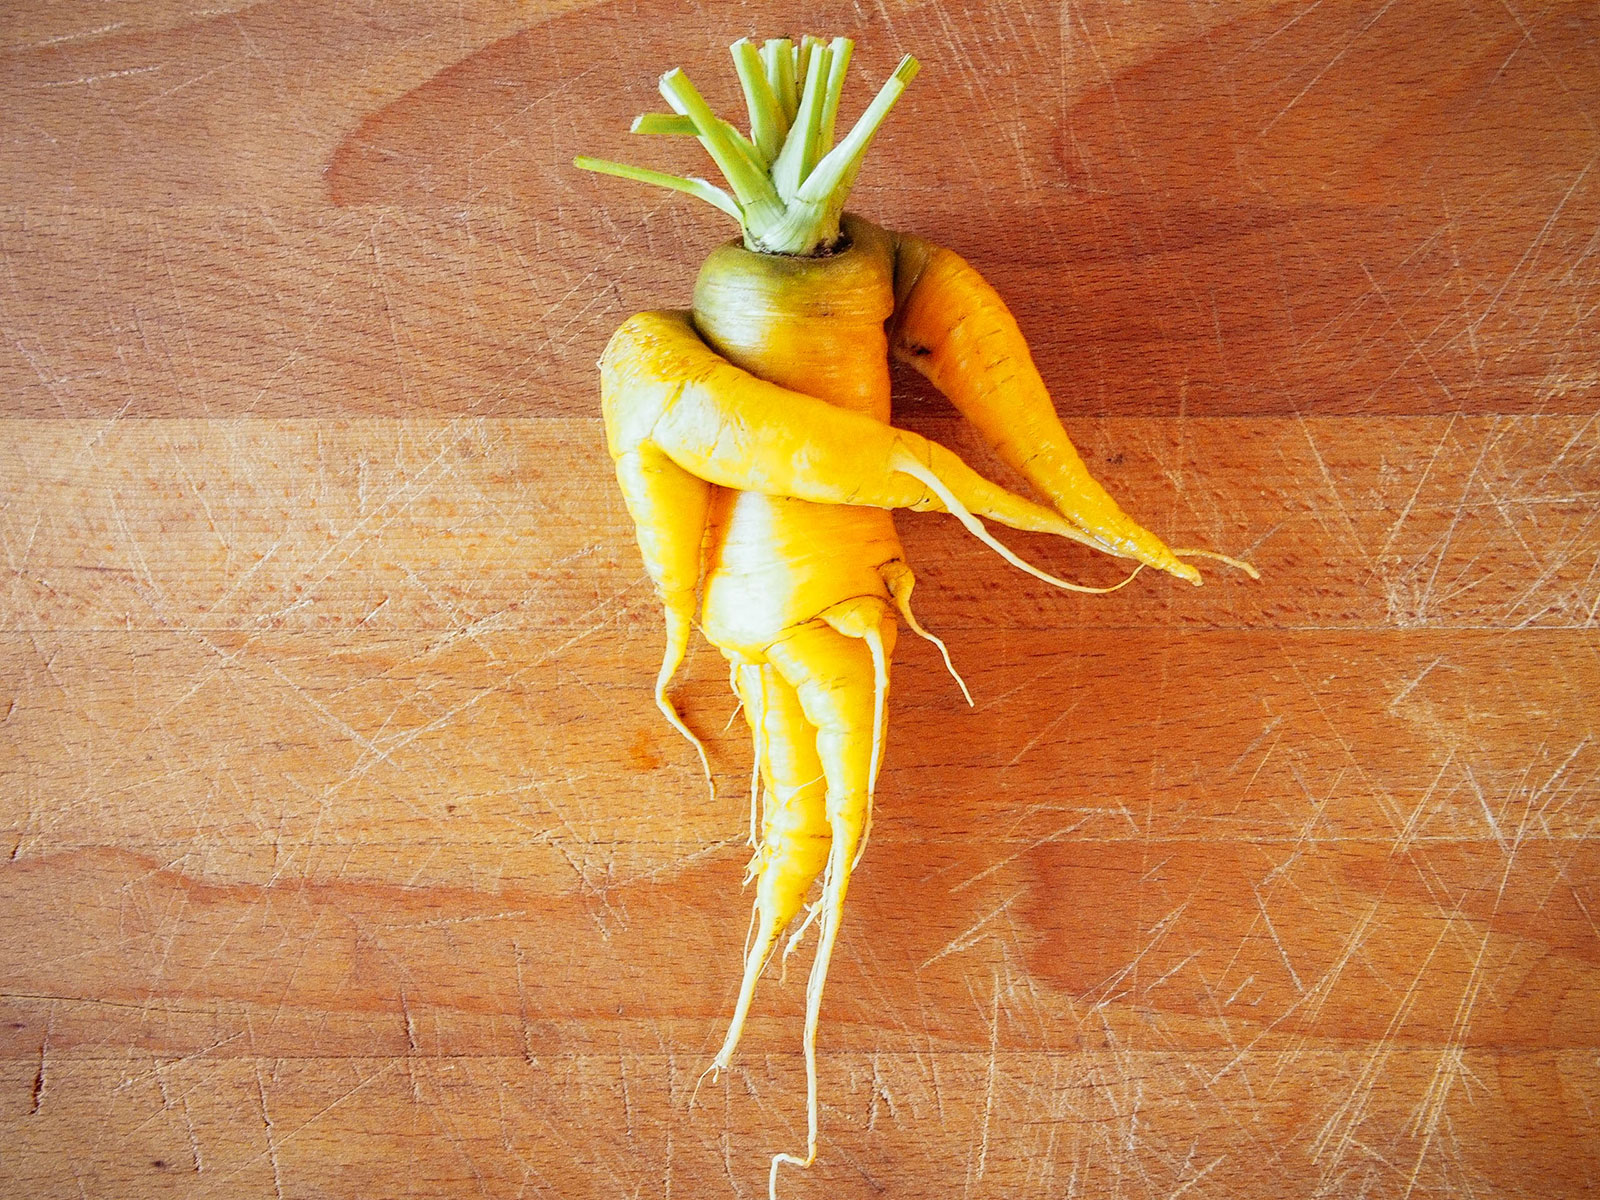 A yellow carrot on a wooden cutting board with multiple branched roots wrapping around itself